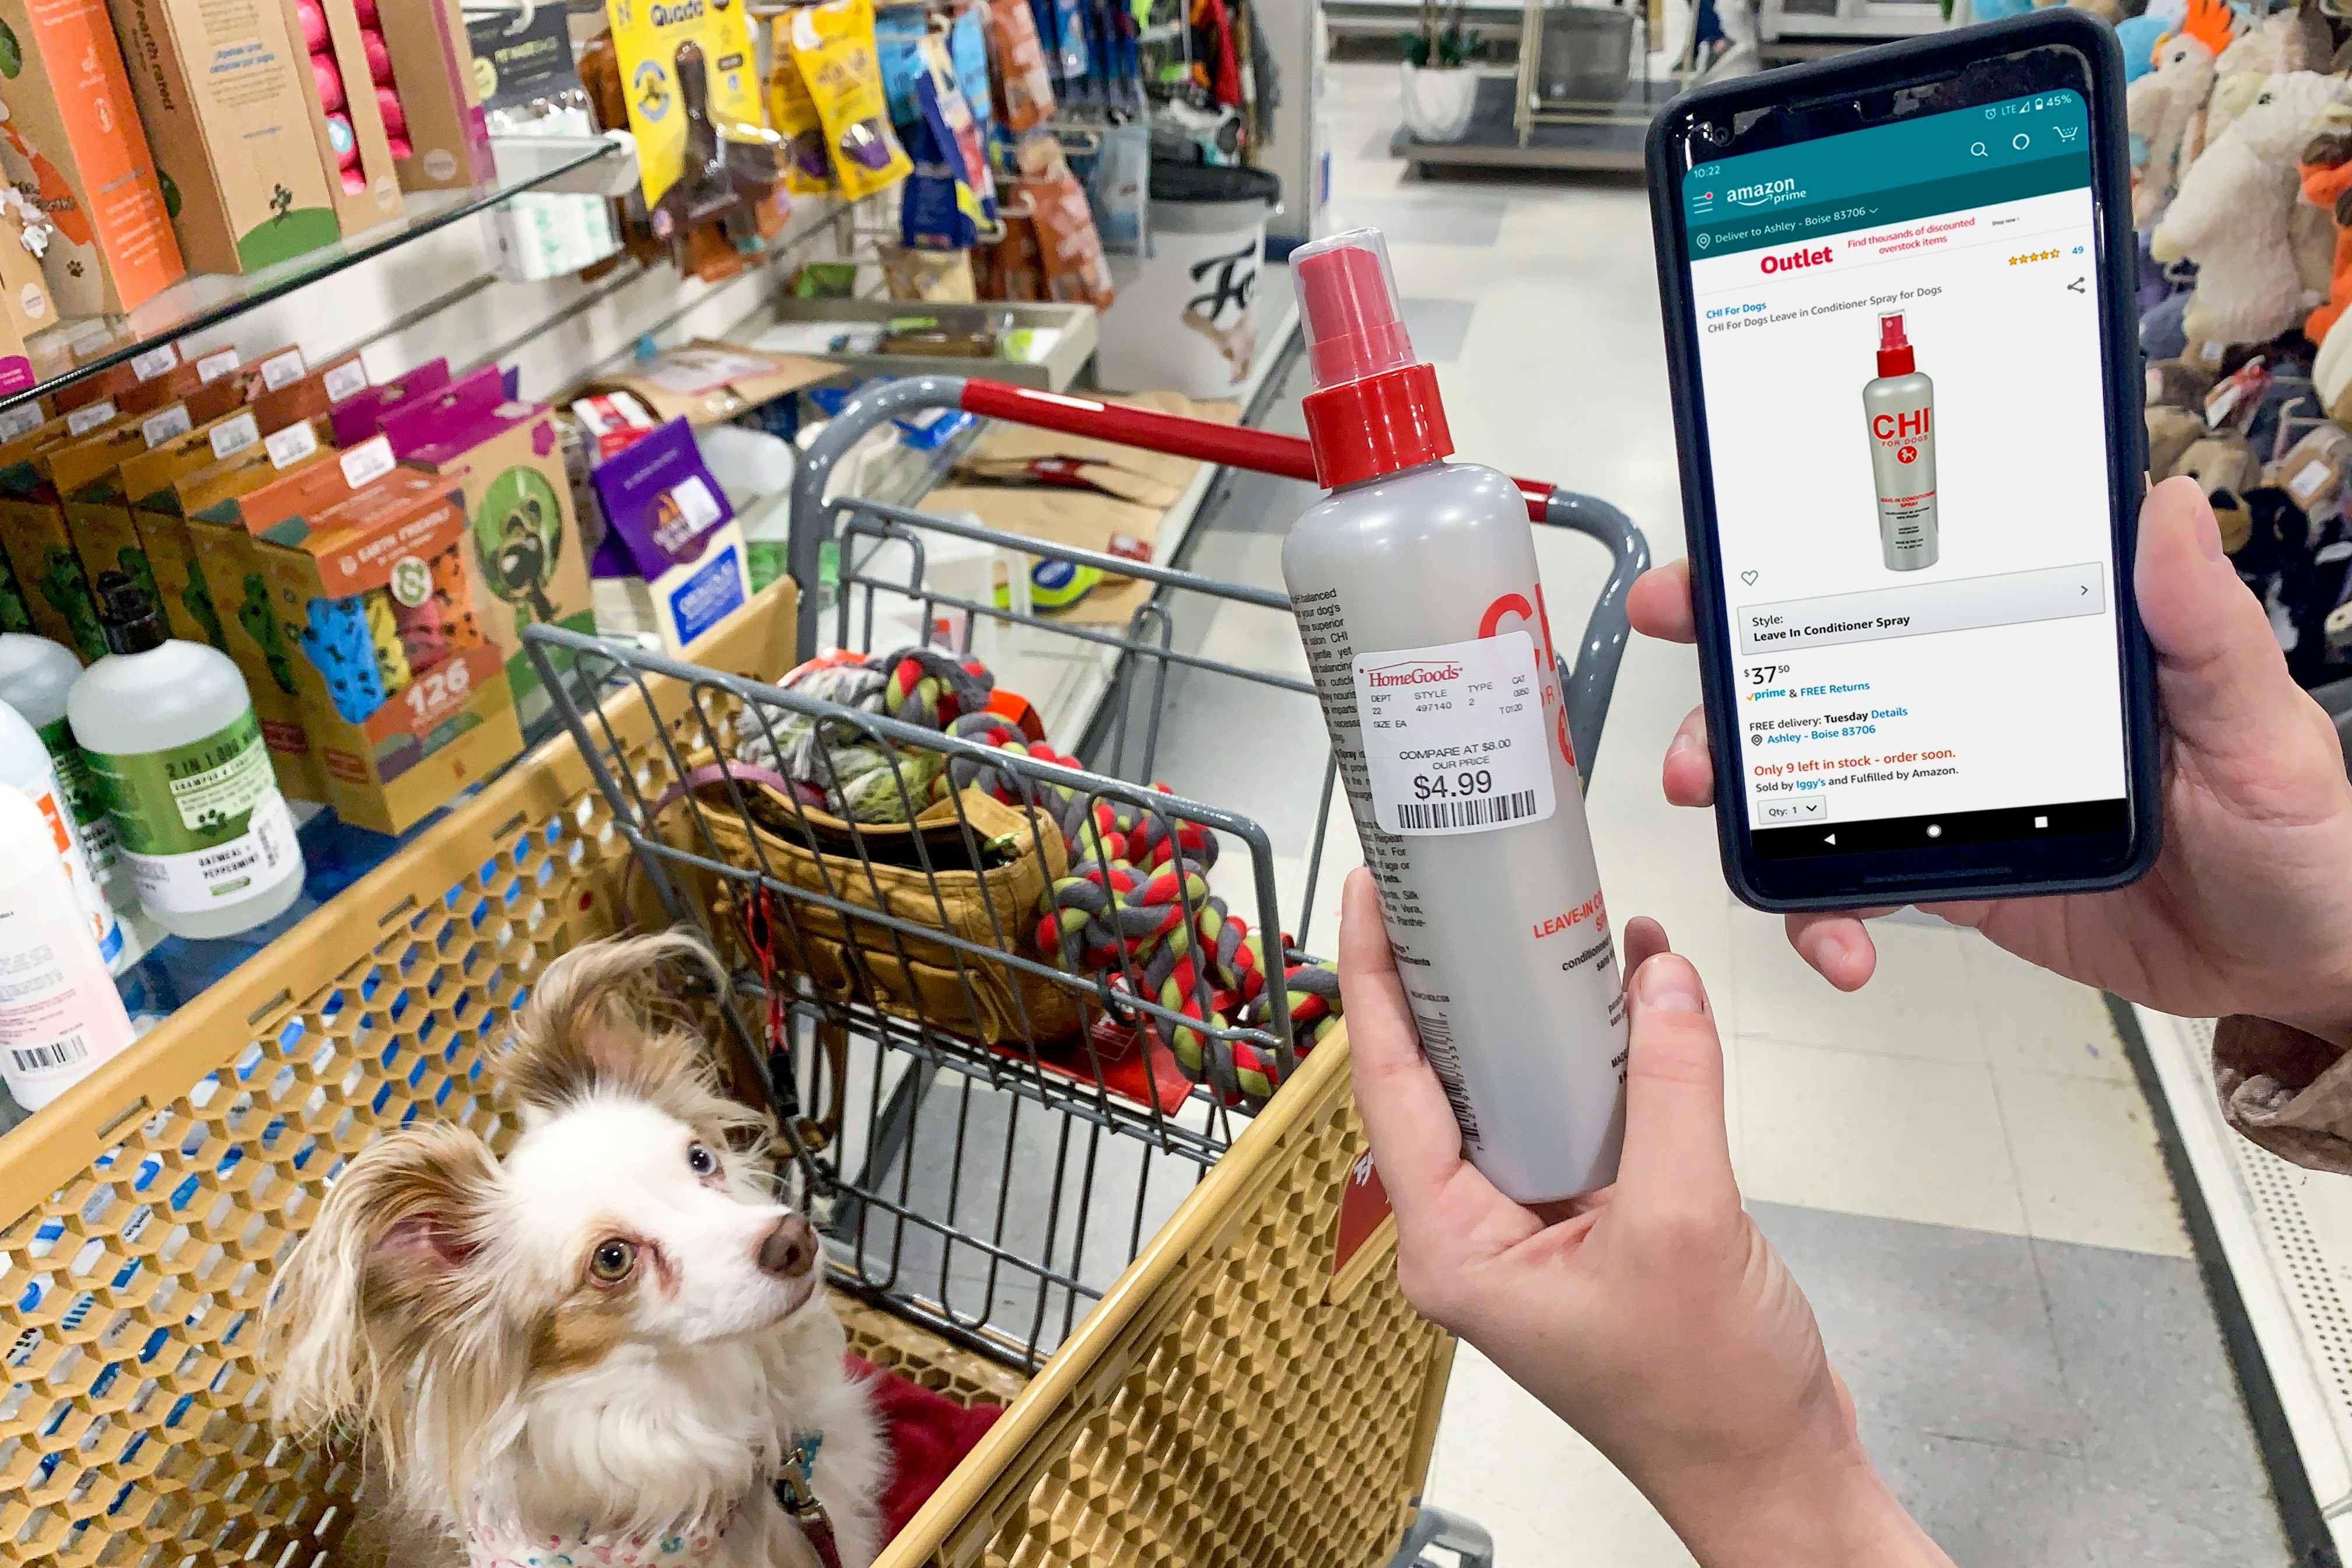 A bottle of Chi Dog leave in conditioner with a price tag reading $4.99, held next to a phone showing the price comparison on the amazon App reading $37.50.